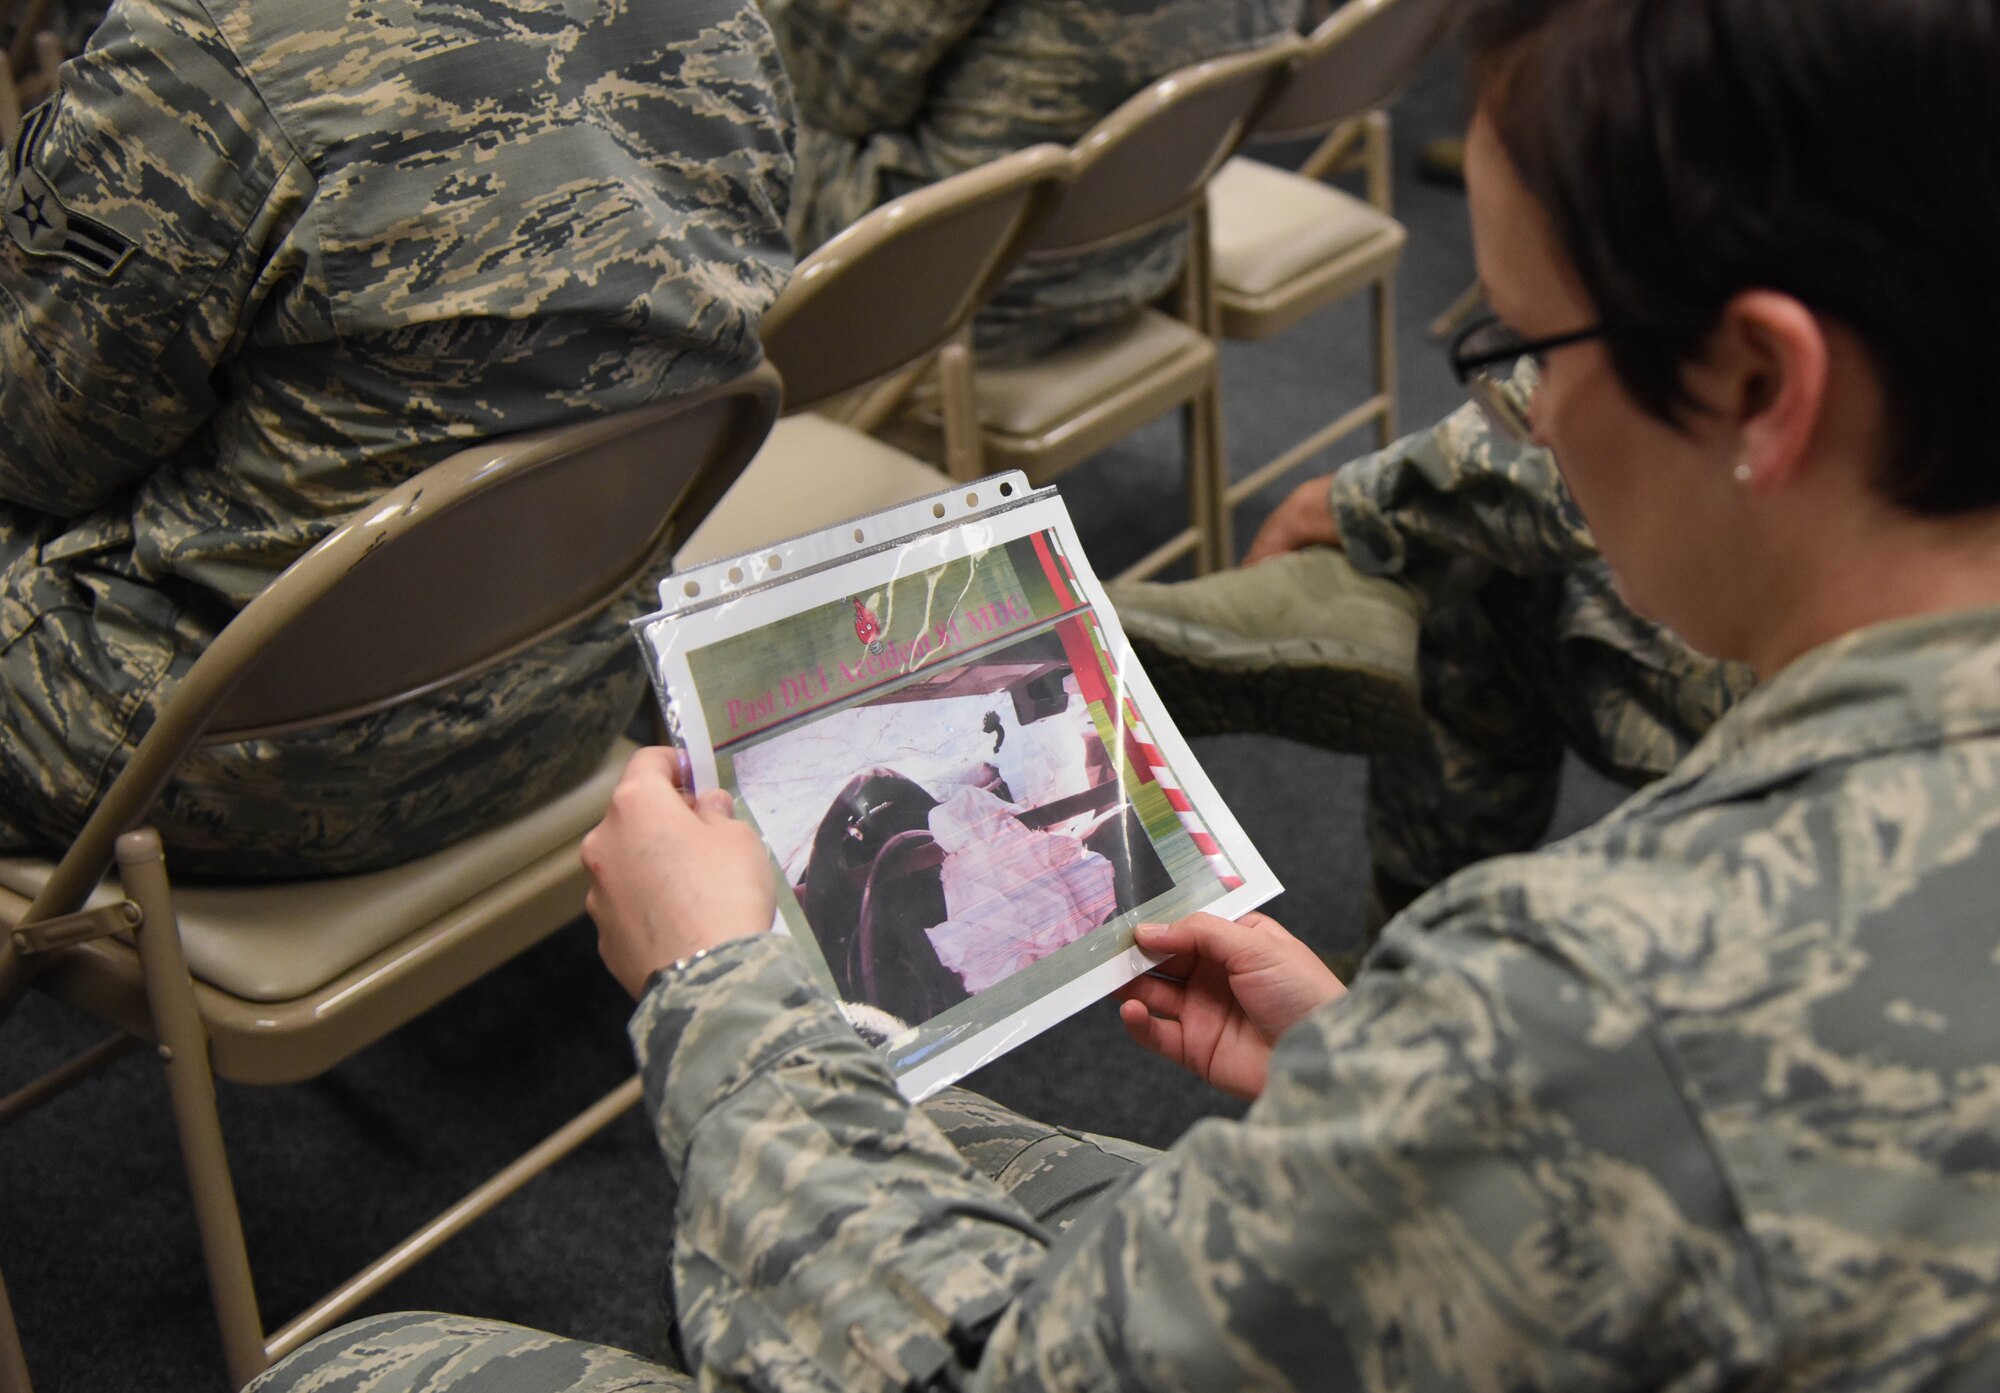 Capt. Rachel Donoho, 81st Communications Squadron operations flight commander, looks at a past DUI accident slide during an alcohol awareness briefing at the 81st CS Dec. 19, 2017, on Keesler Air Force Base, Mississippi. December is Impaired Driving Awareness Month. More than 200 people were killed in Mississippi last year in drunk driving related incidents. (U.S. Air Force photo by Kemberly Groue)